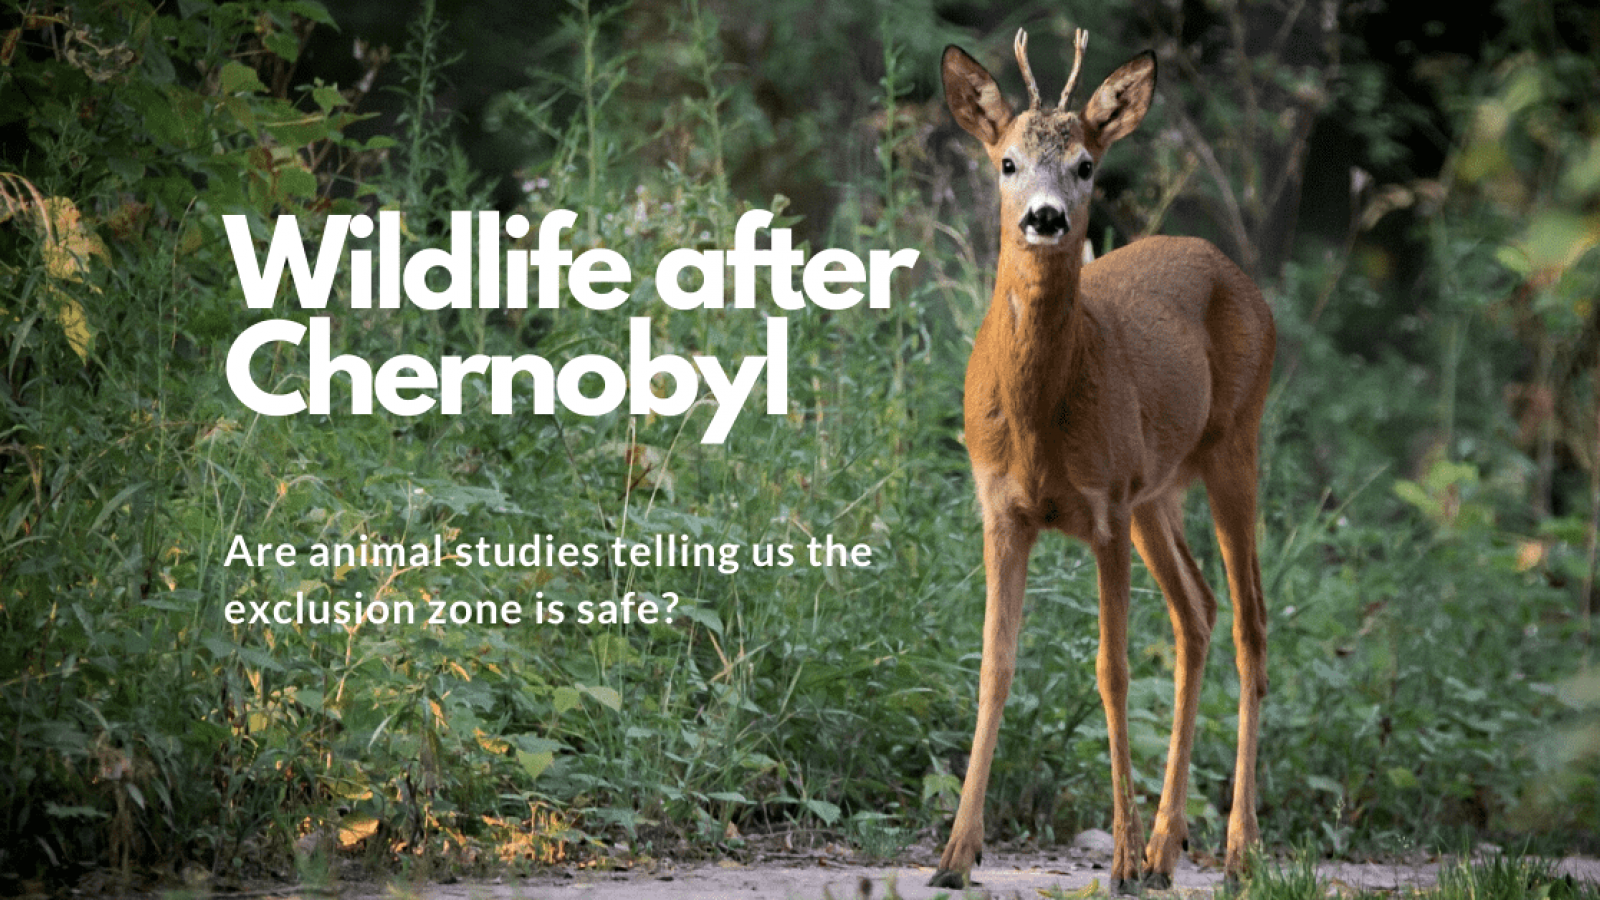 What happened to wildlife after Chernobyl? :: Understanding Animal Research